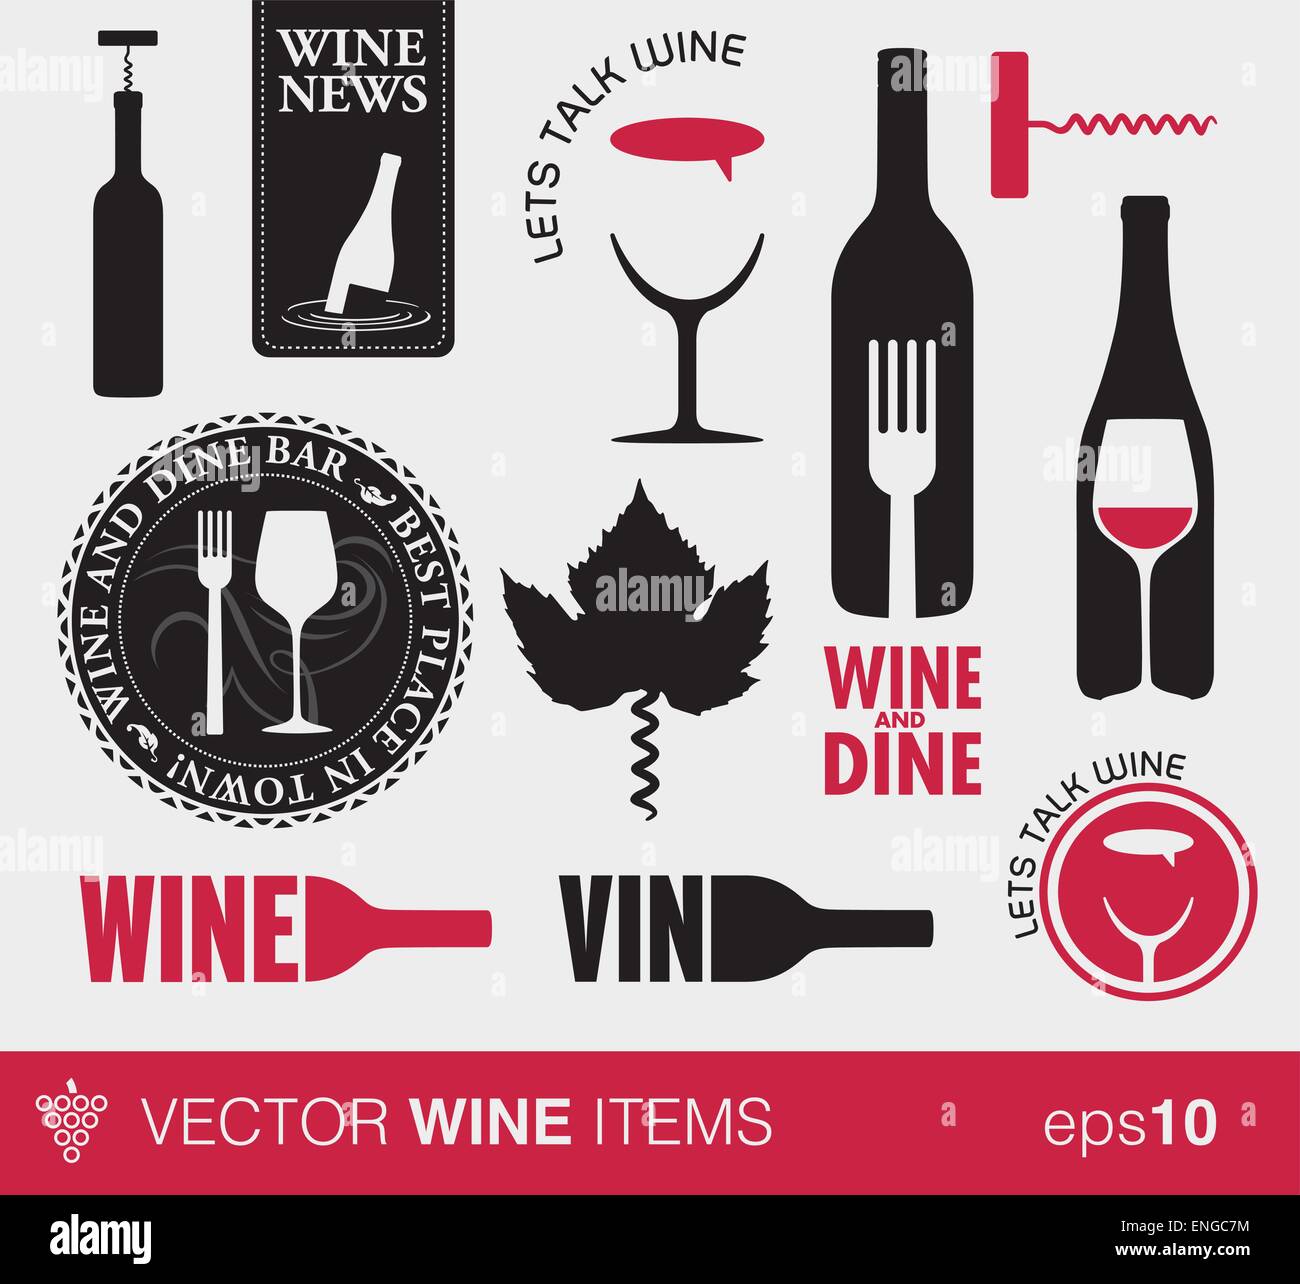 Vector wine labels and concepts Stock Vector